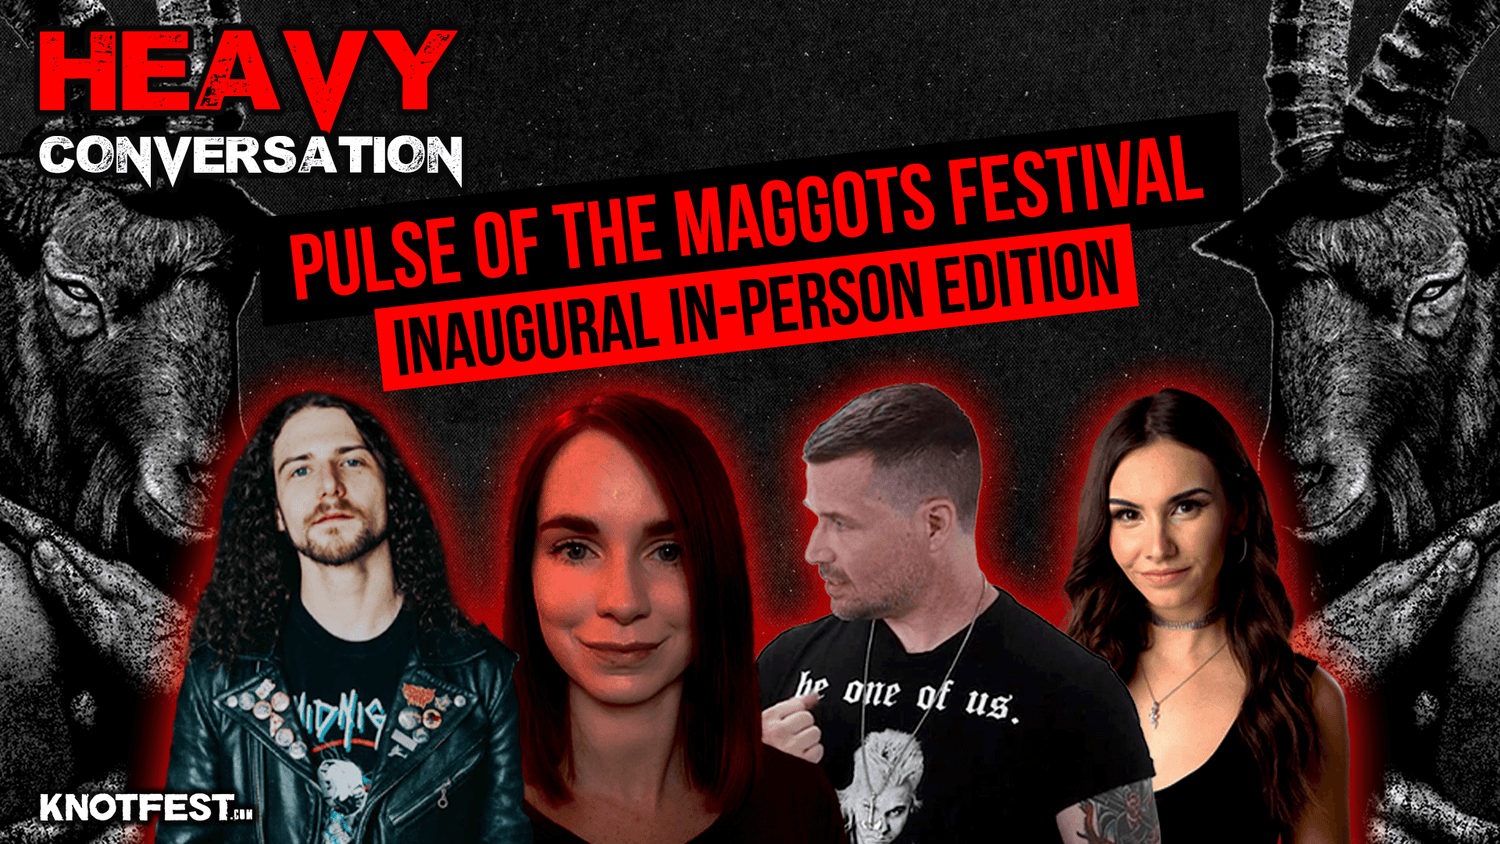 HEAVY CONVERSATION: The inaugural in-person Pulse of the Maggots Festival recap edition